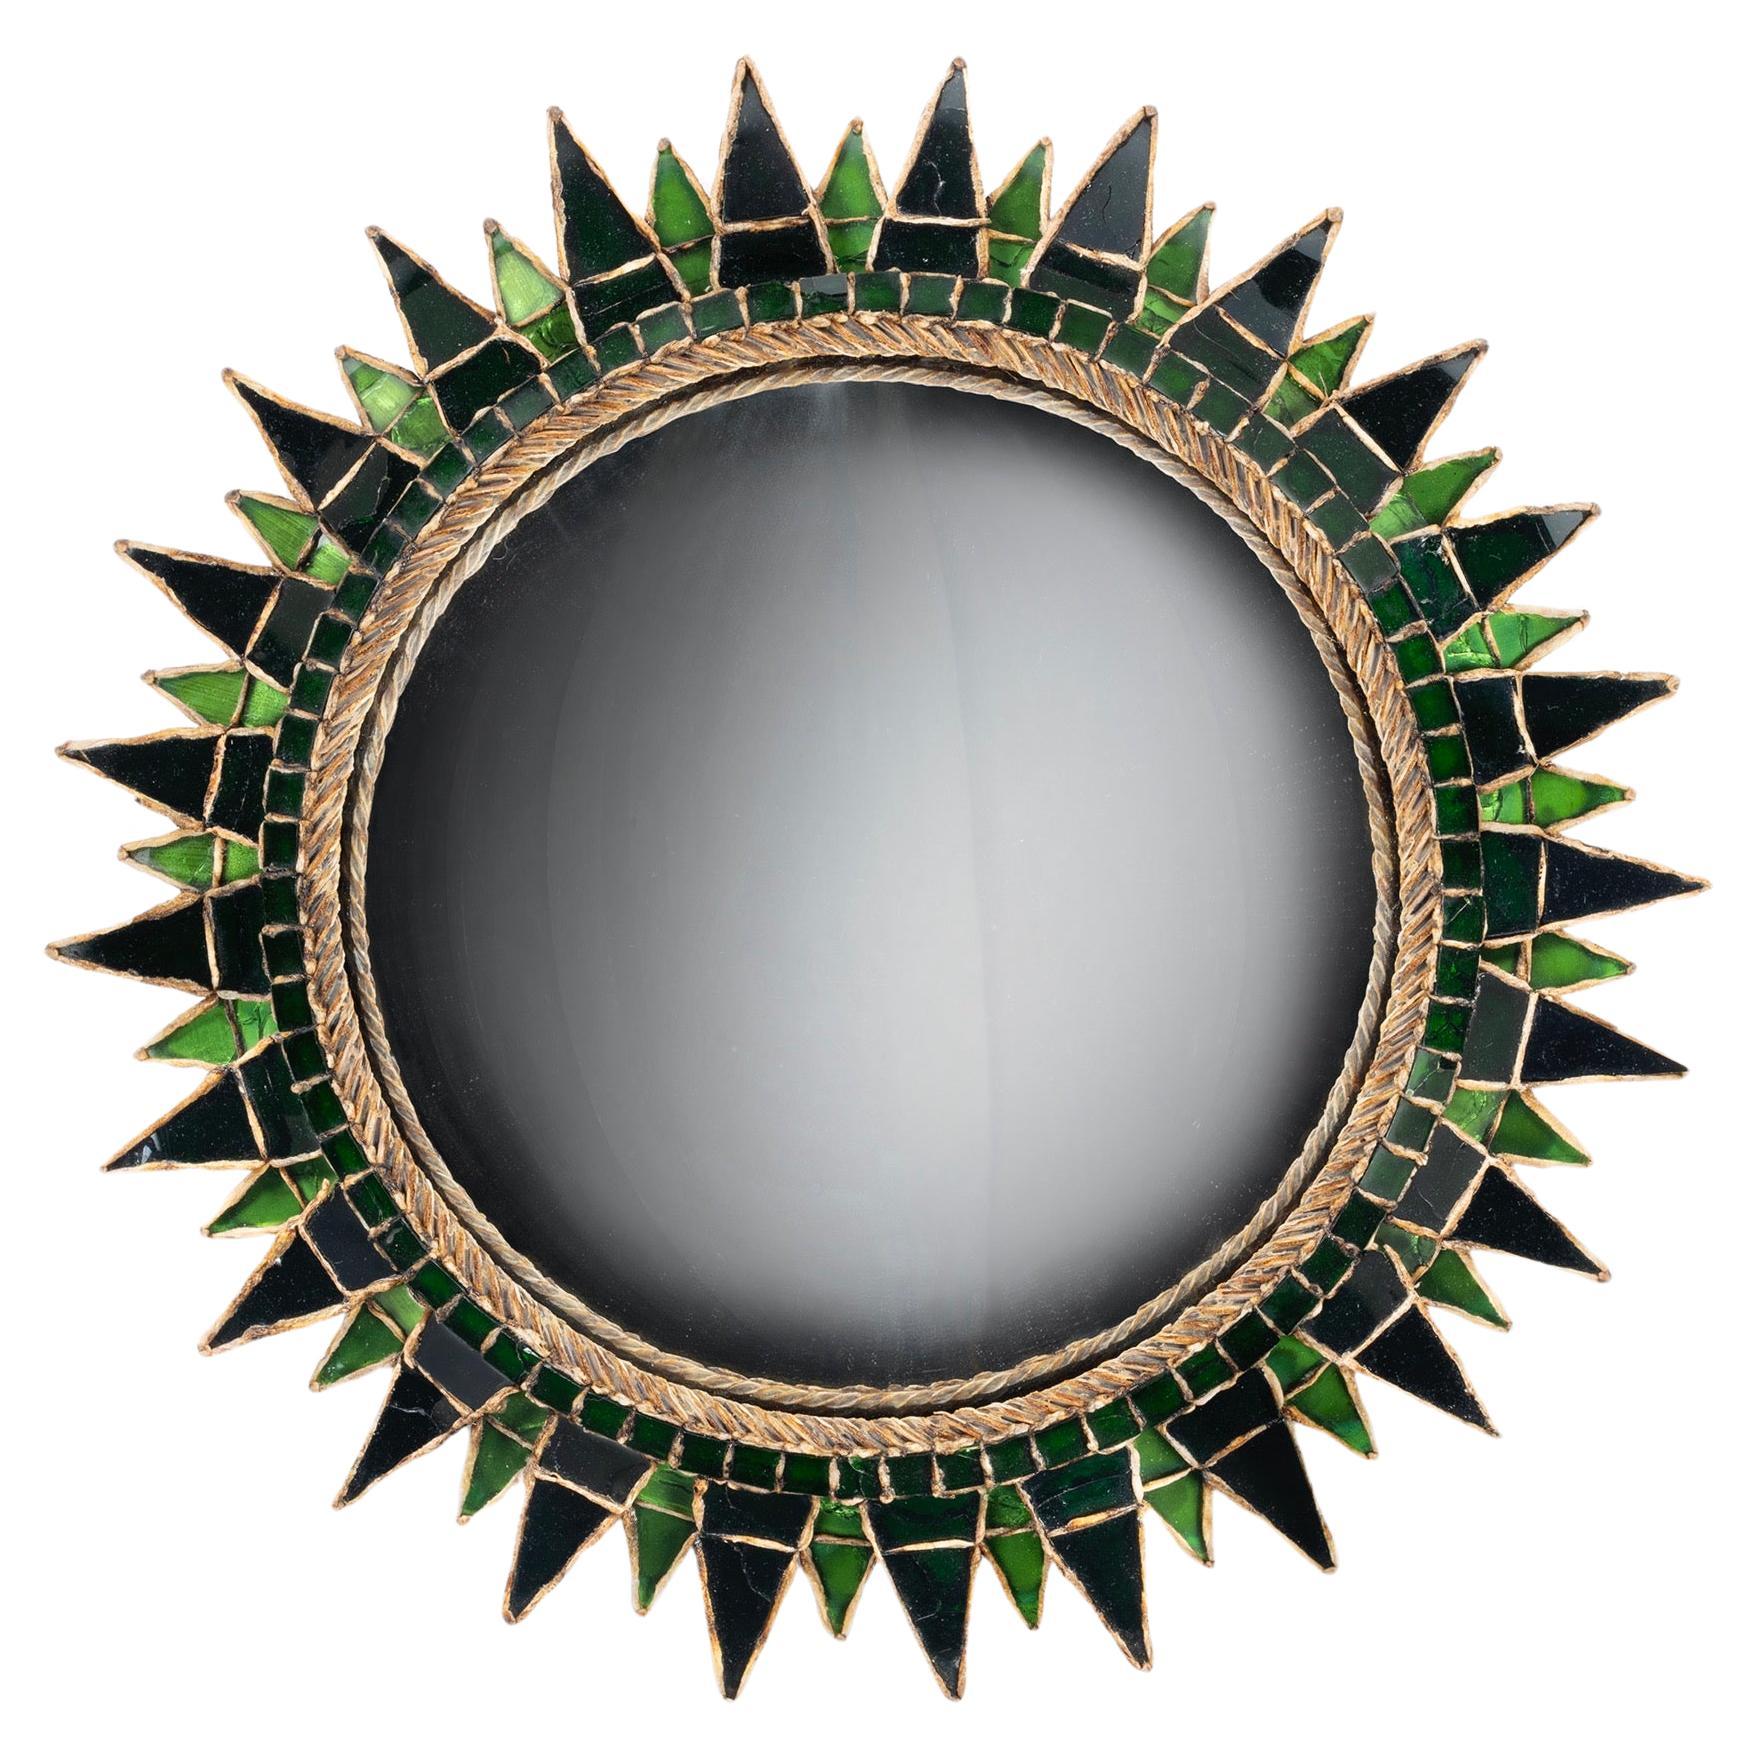 Soleil à pointes (Spiked sun) by Line Vautrin – Talosel mirror For Sale